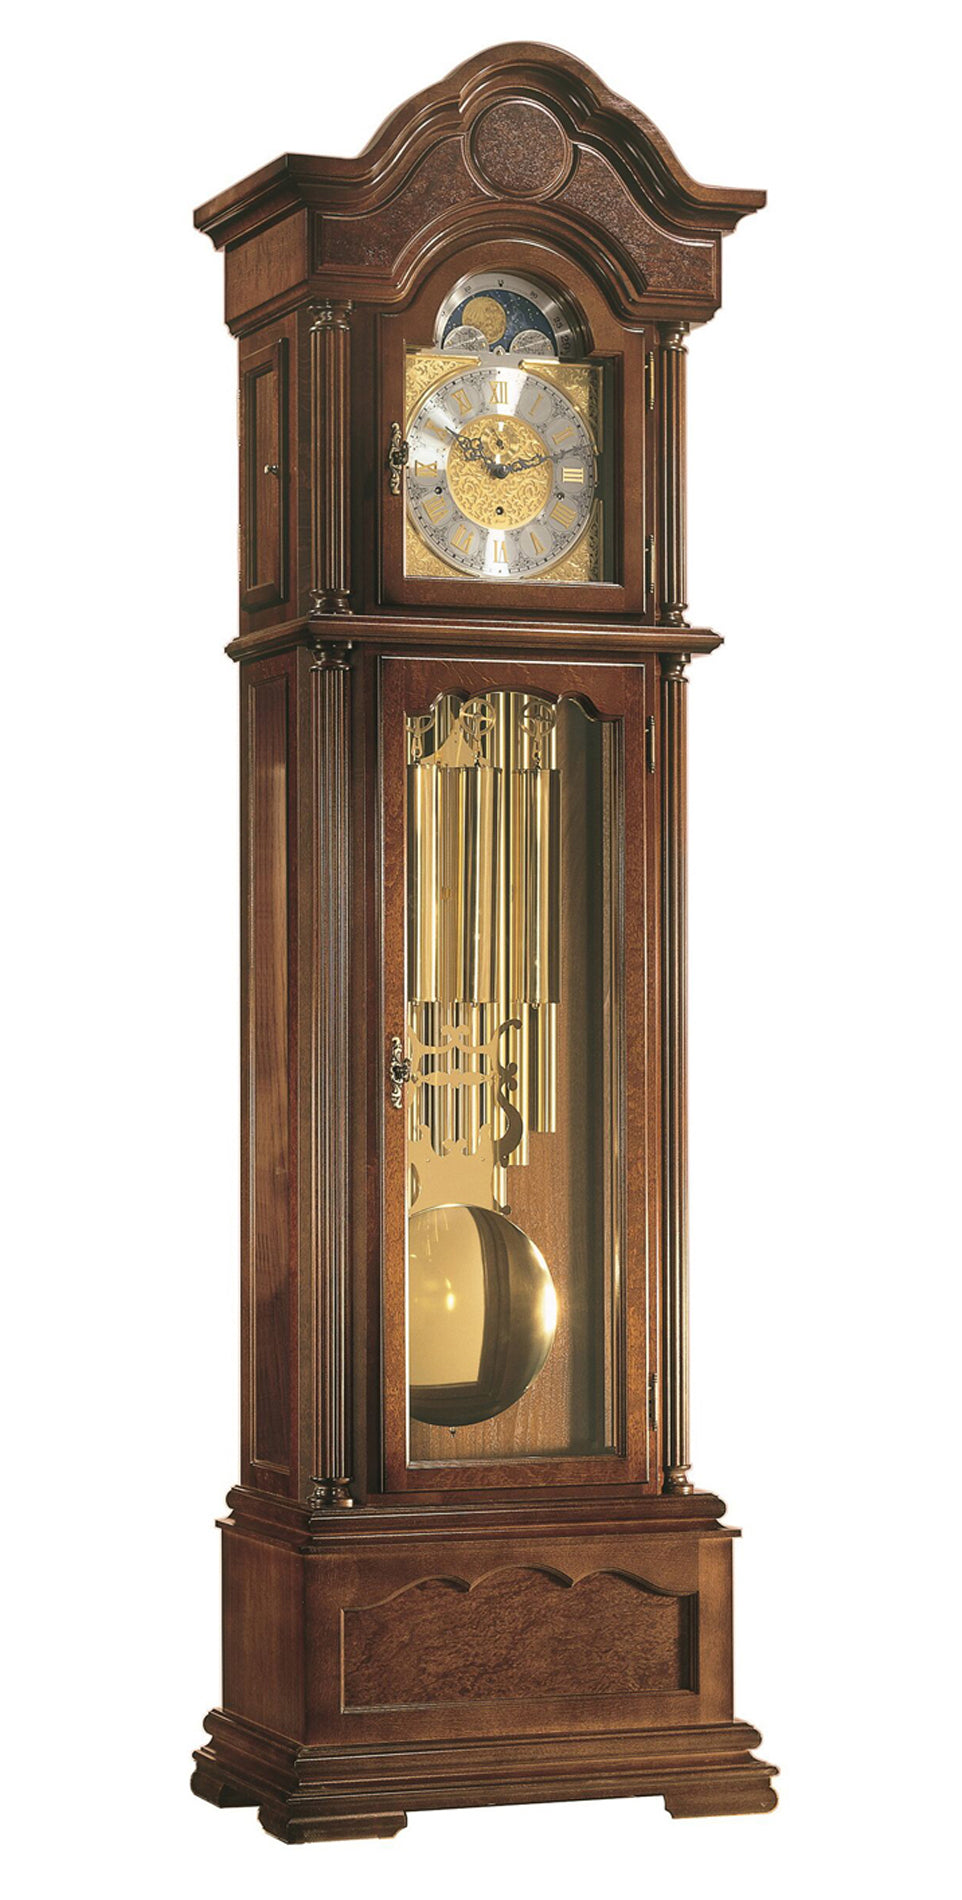 Temple Grandfather Clock by Hermle